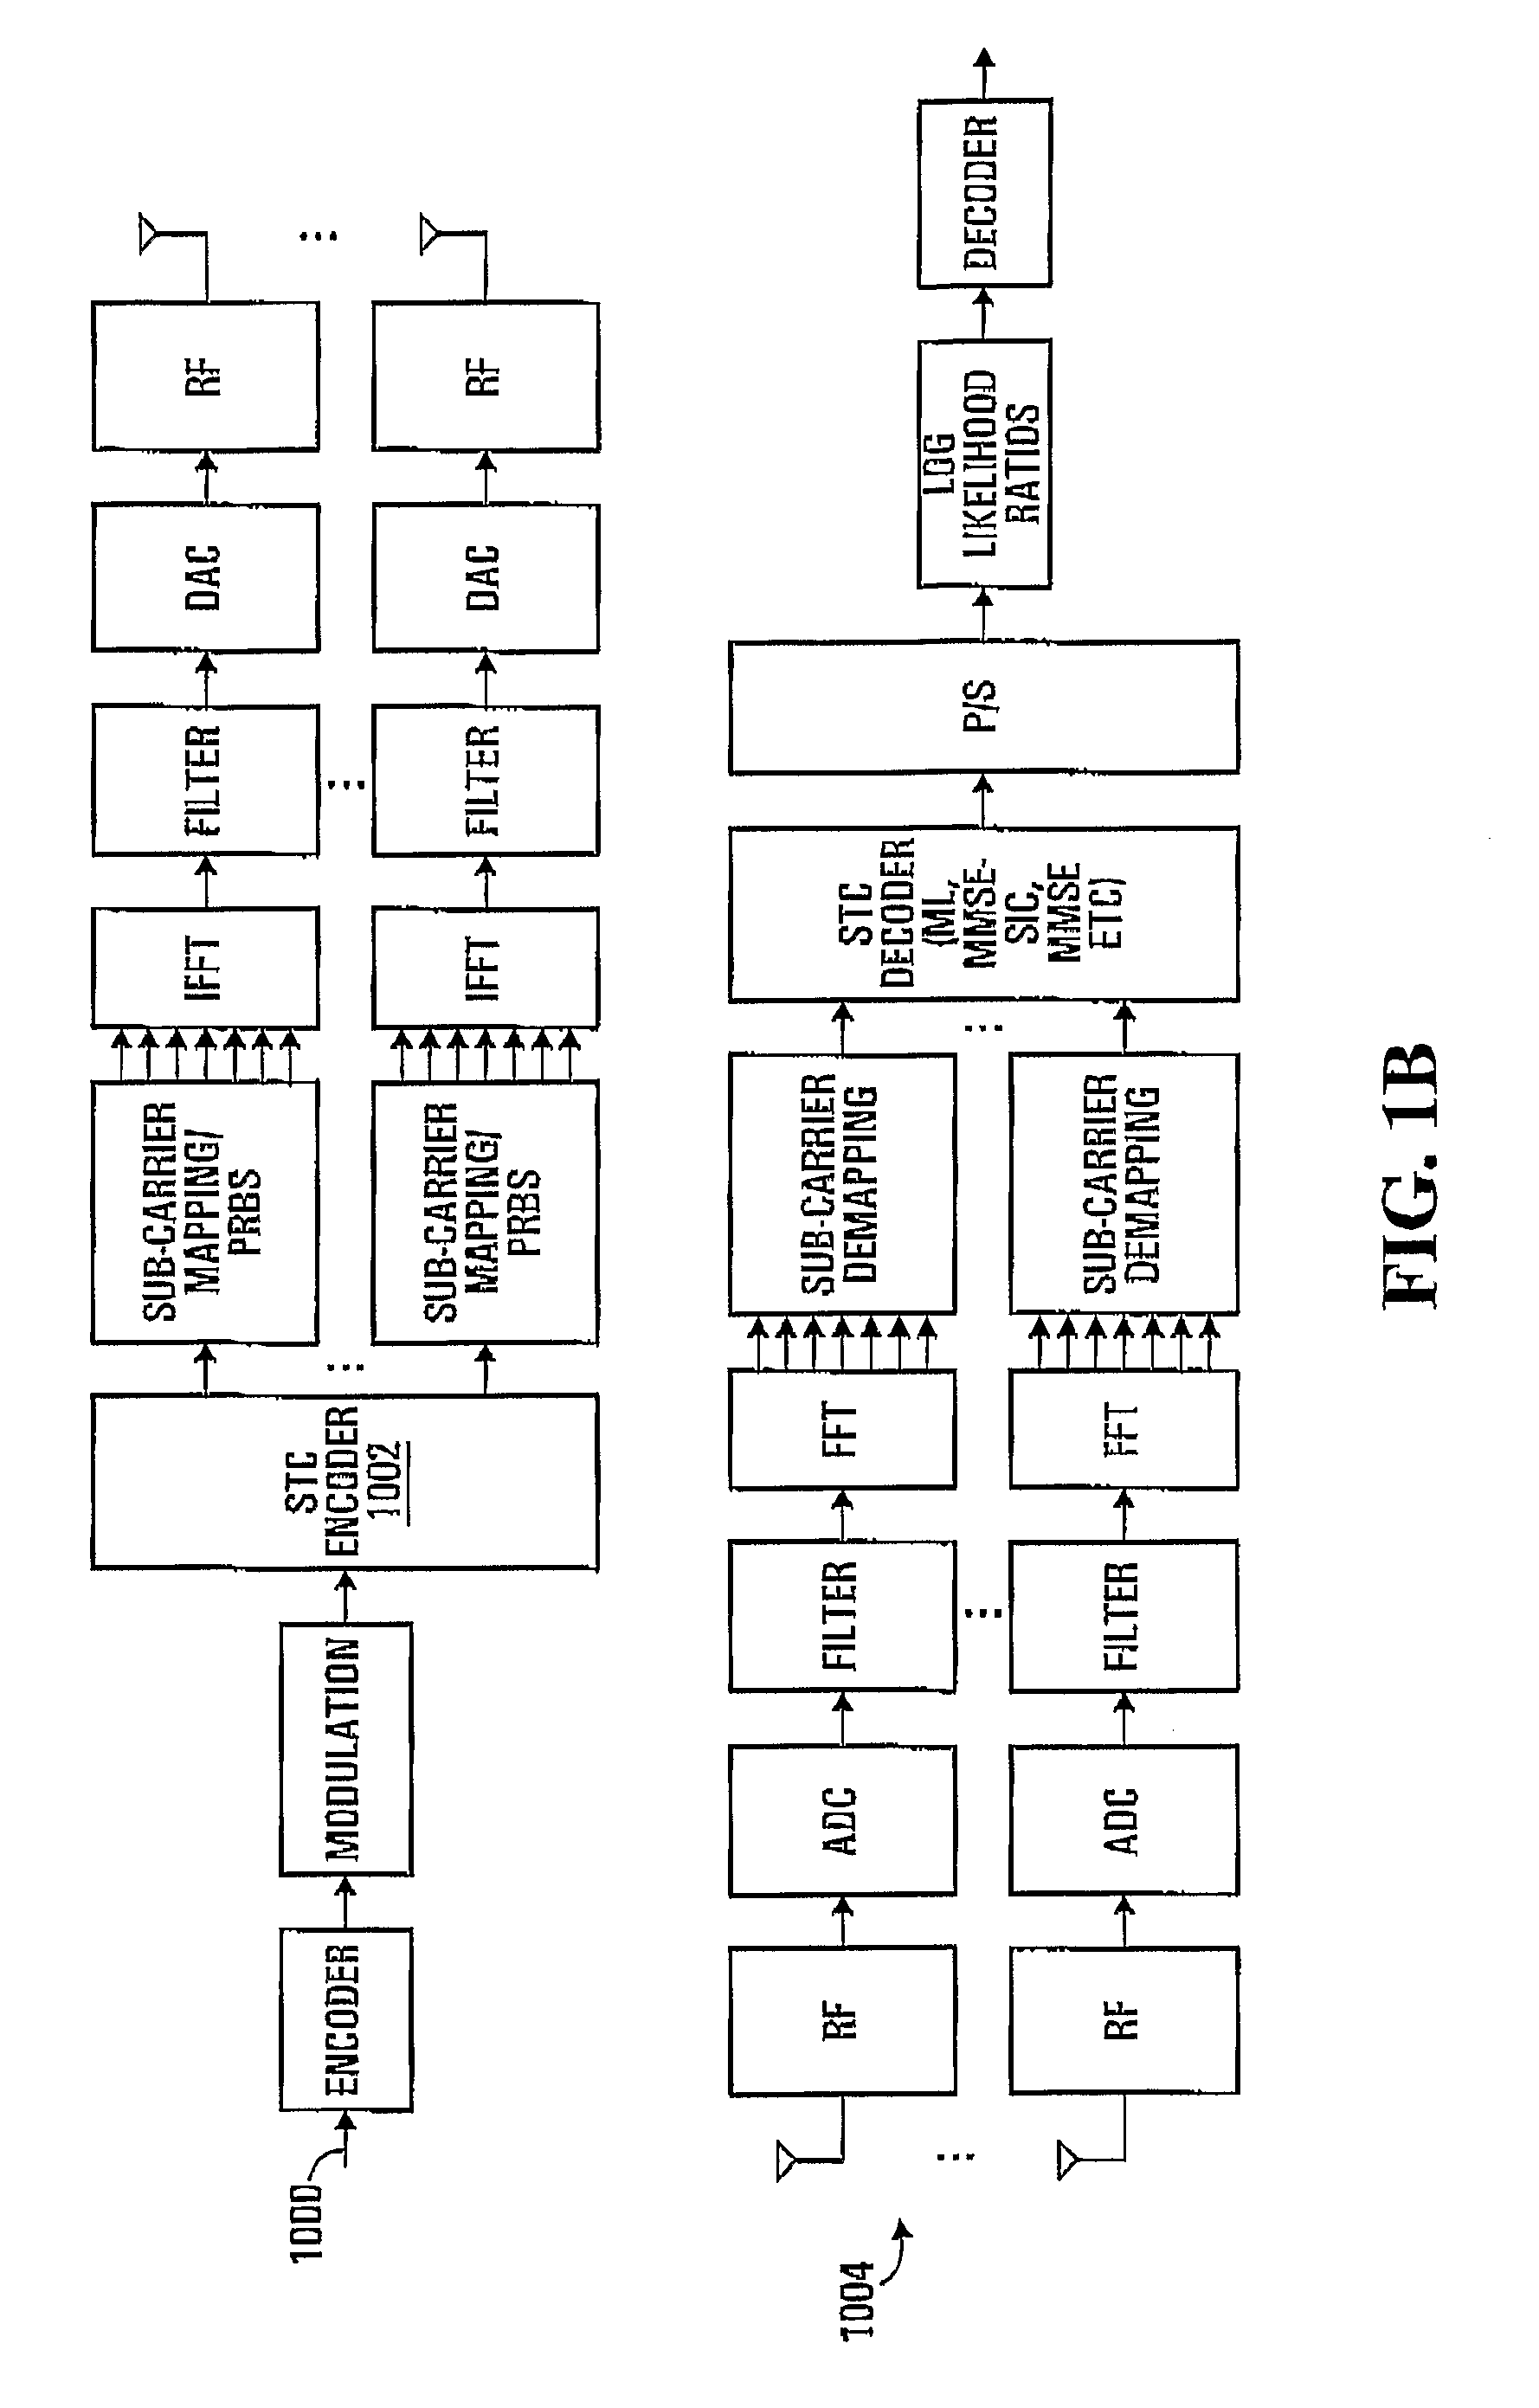 Methods for supporting MIMO transmission in OFDM applications